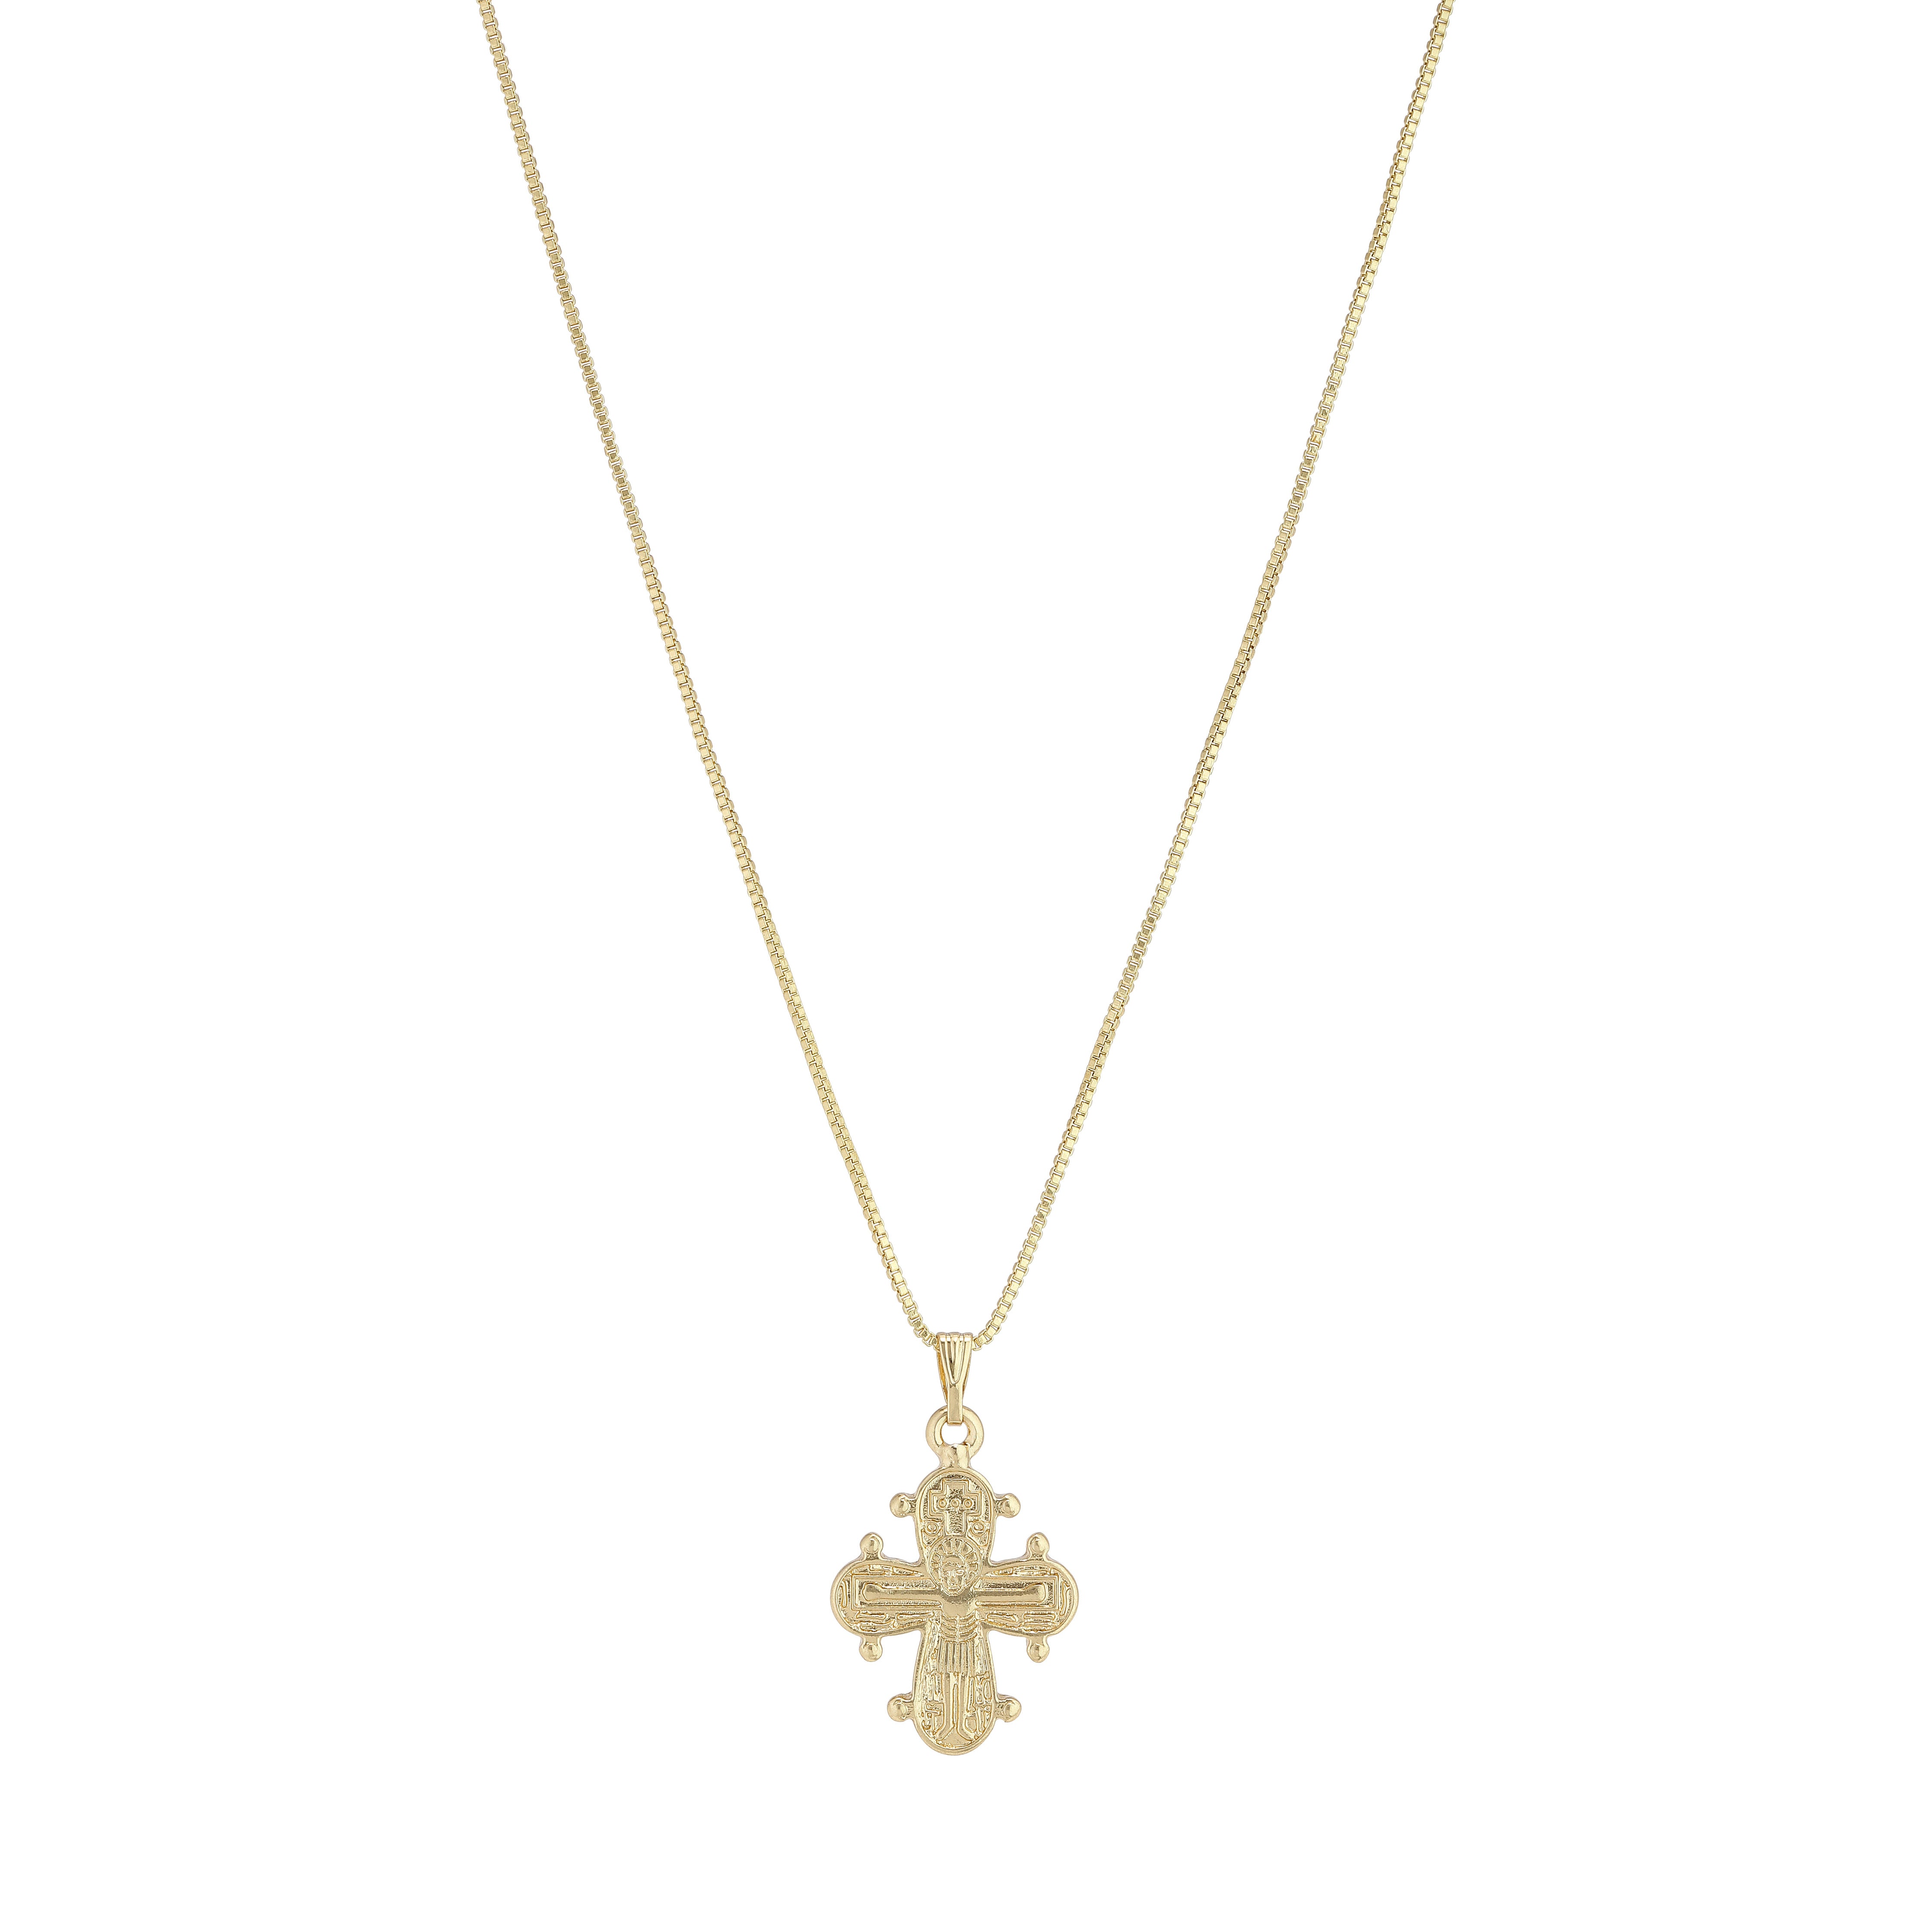 DAGMAR recycled pendant necklace gold-plated